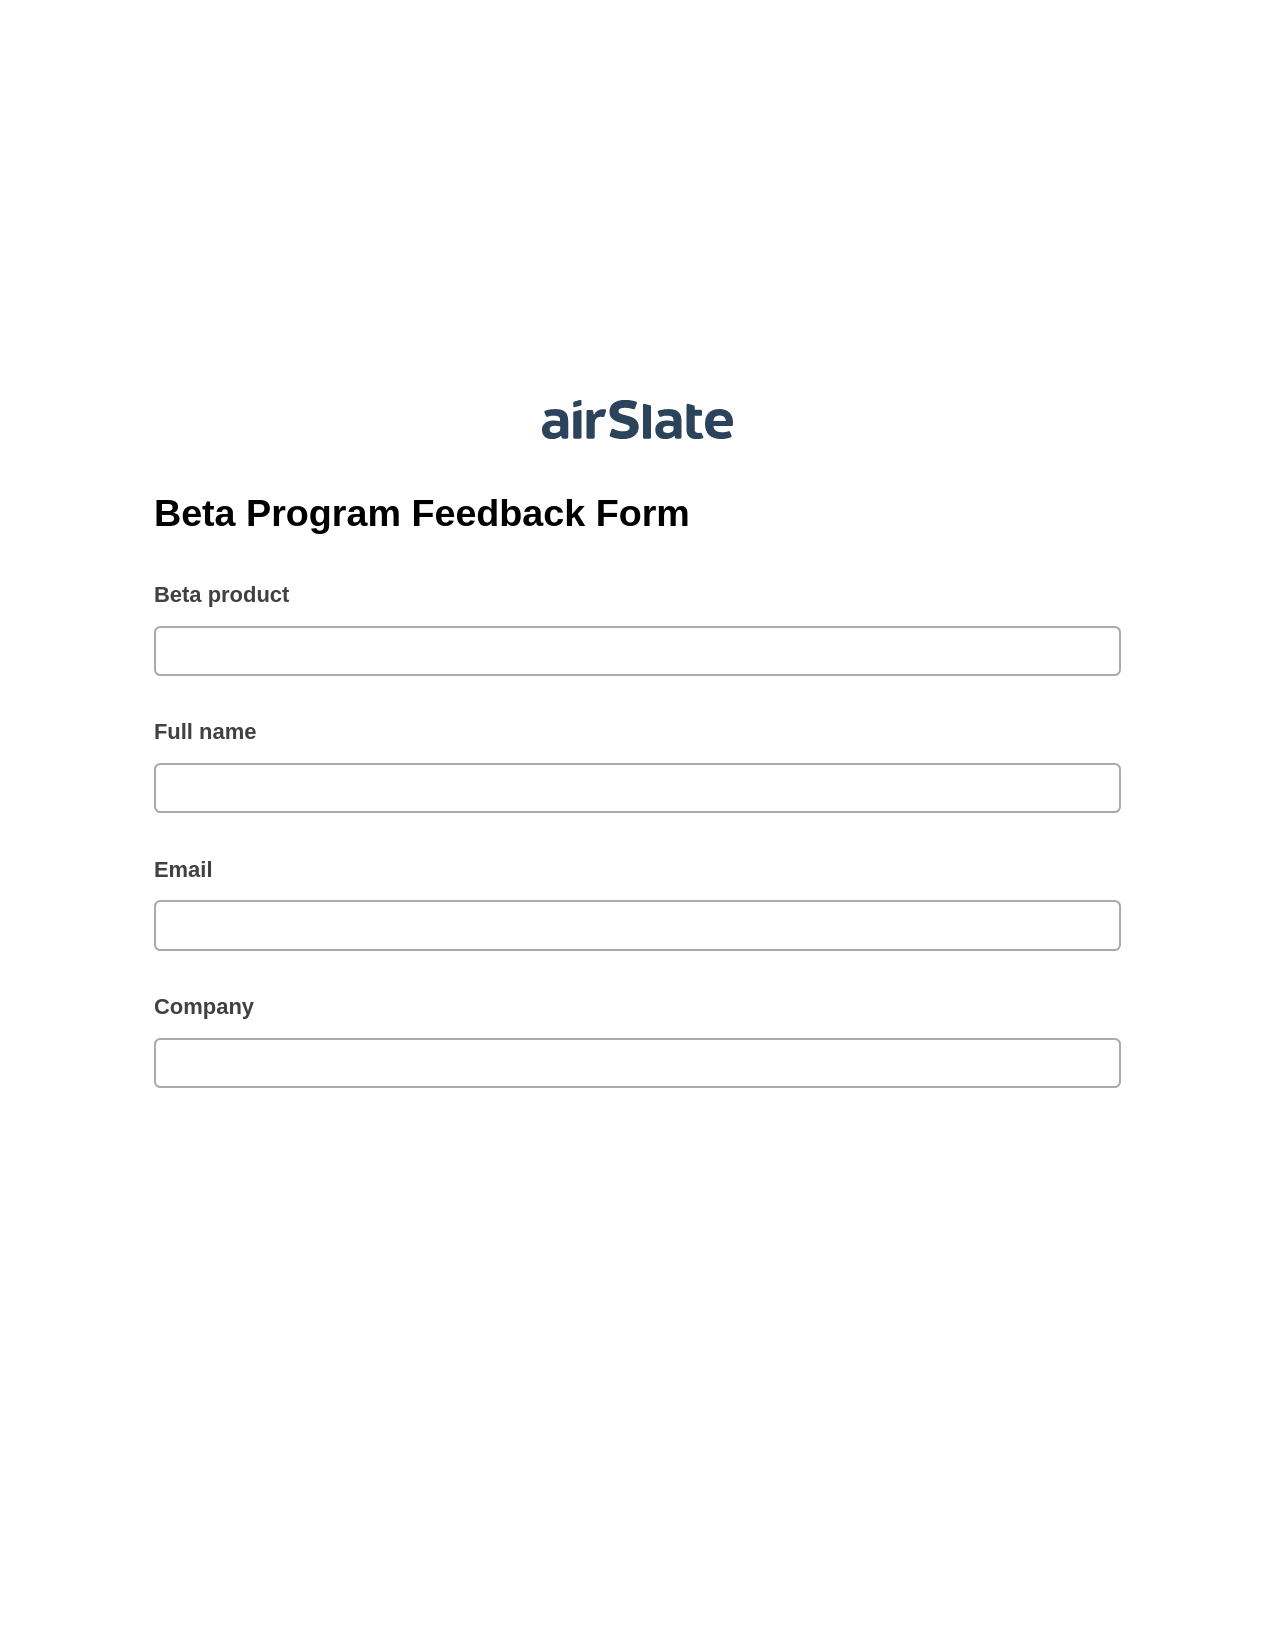 Beta Program Feedback Form Pre-fill Slate from MS Dynamics 365 Records Bot, Audit Trail Bot, Archive to SharePoint Folder Bot